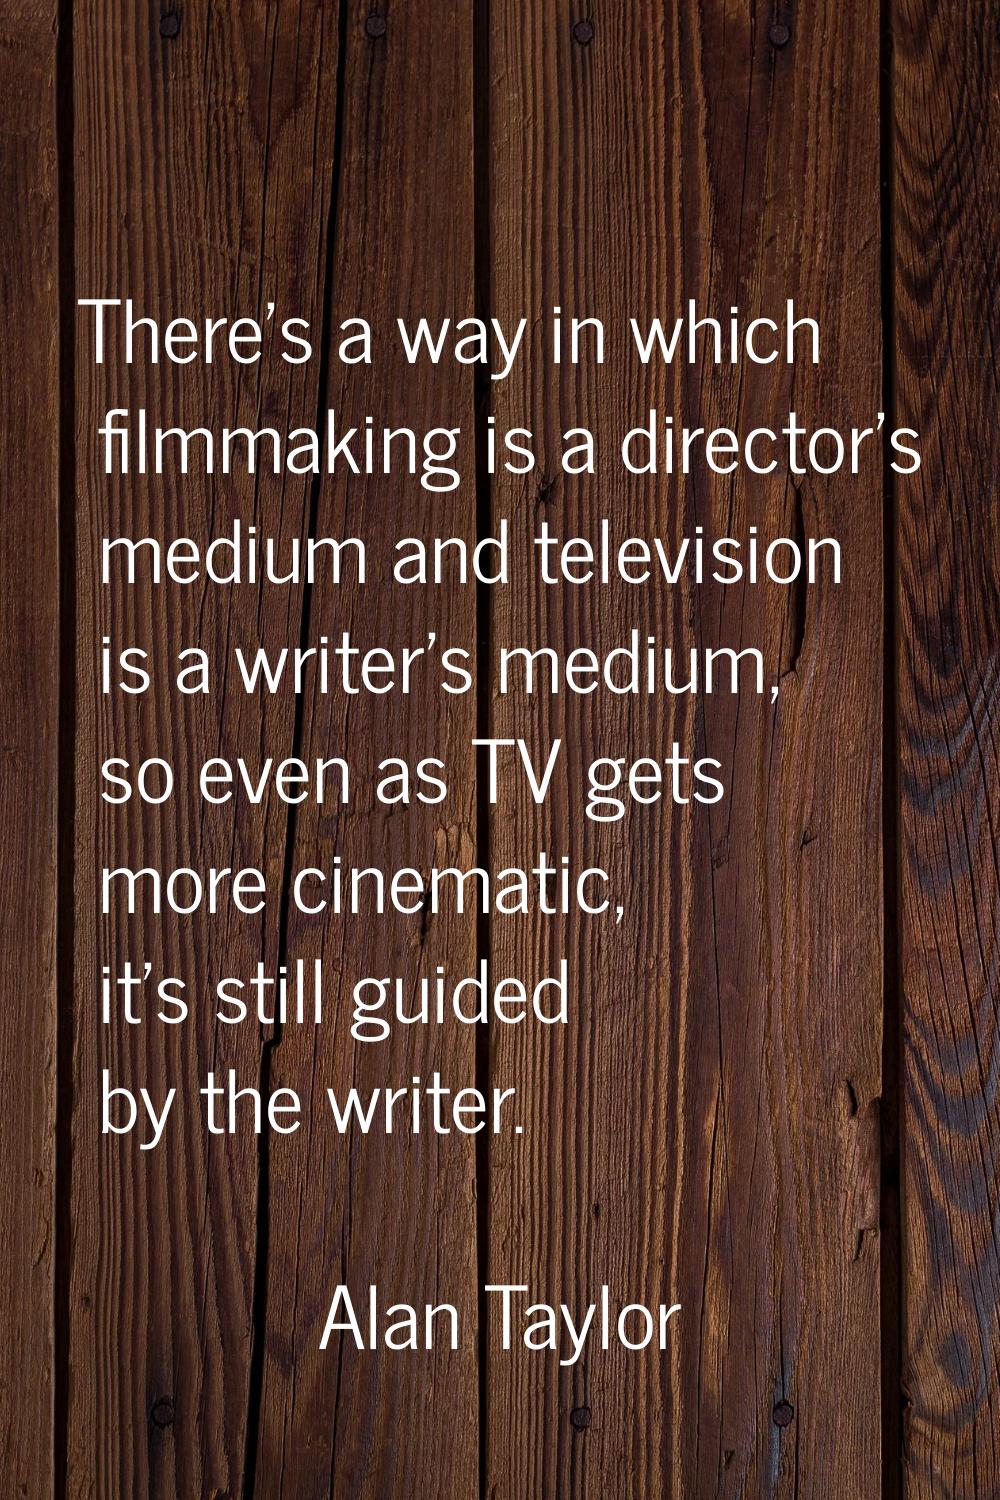 There's a way in which filmmaking is a director's medium and television is a writer's medium, so ev